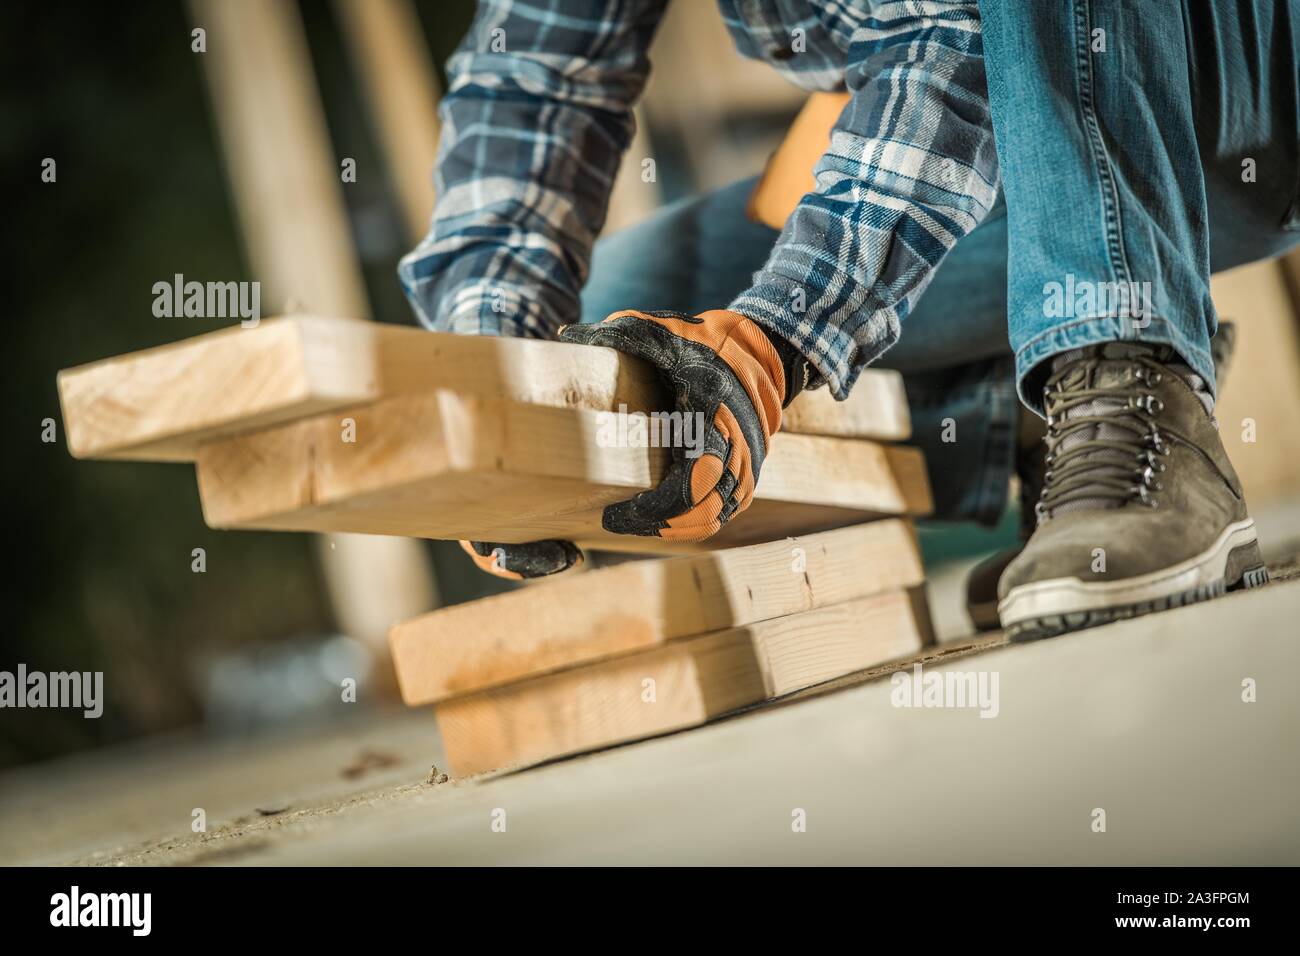 Carpenter Contractor Worker Taking Wood Building Elements From a Floor. Industrial Concept. Stock Photo